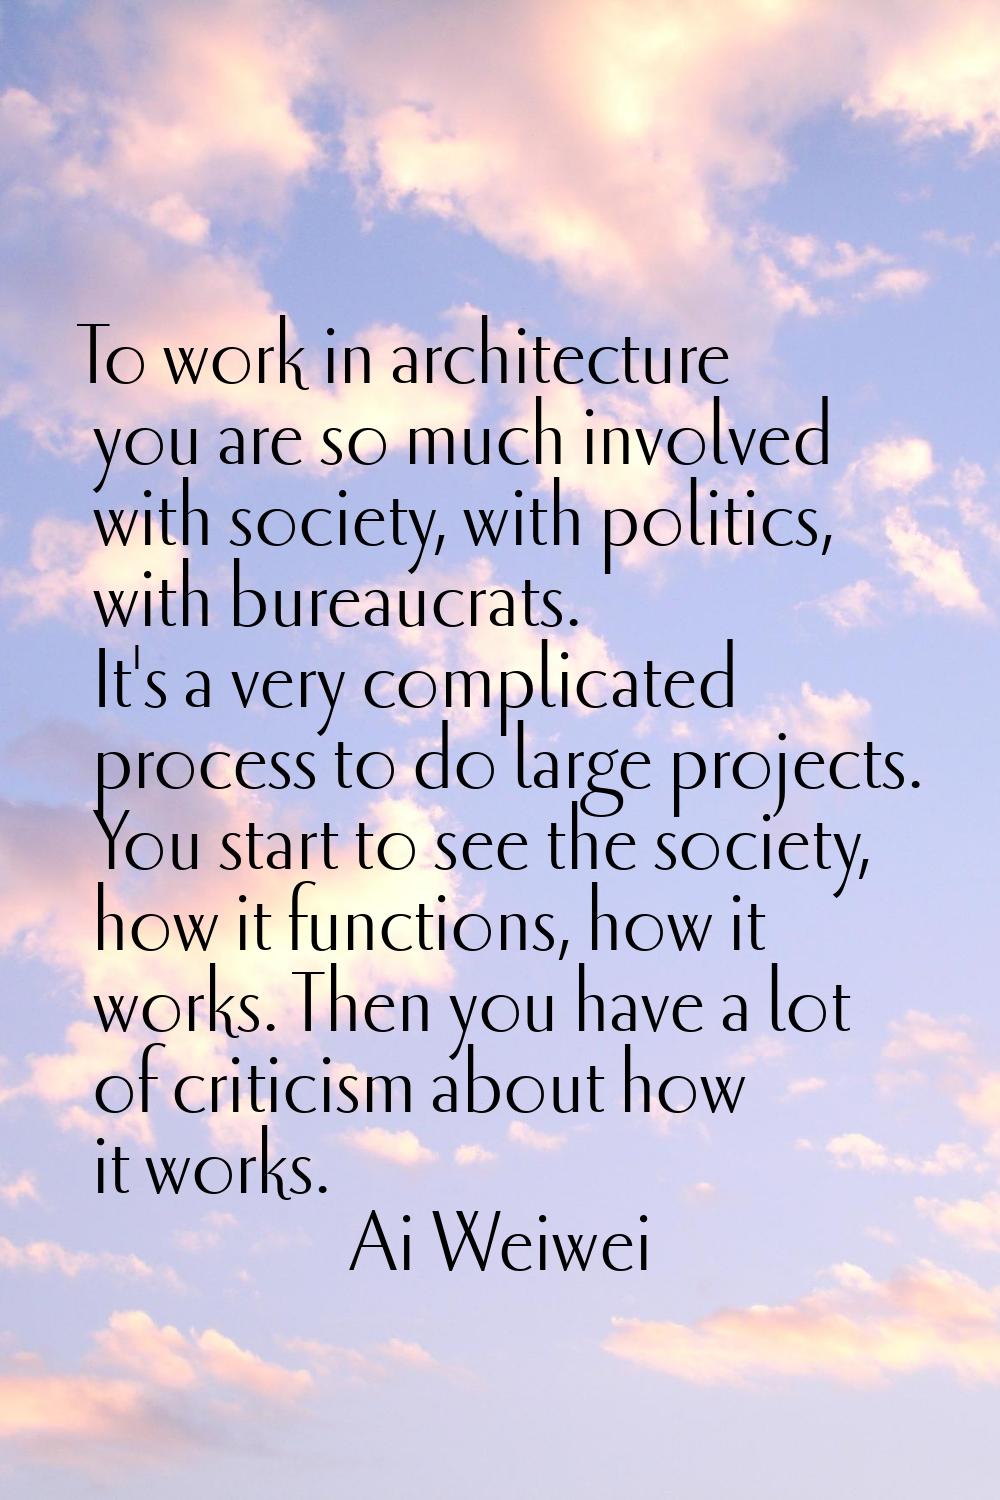 To work in architecture you are so much involved with society, with politics, with bureaucrats. It'